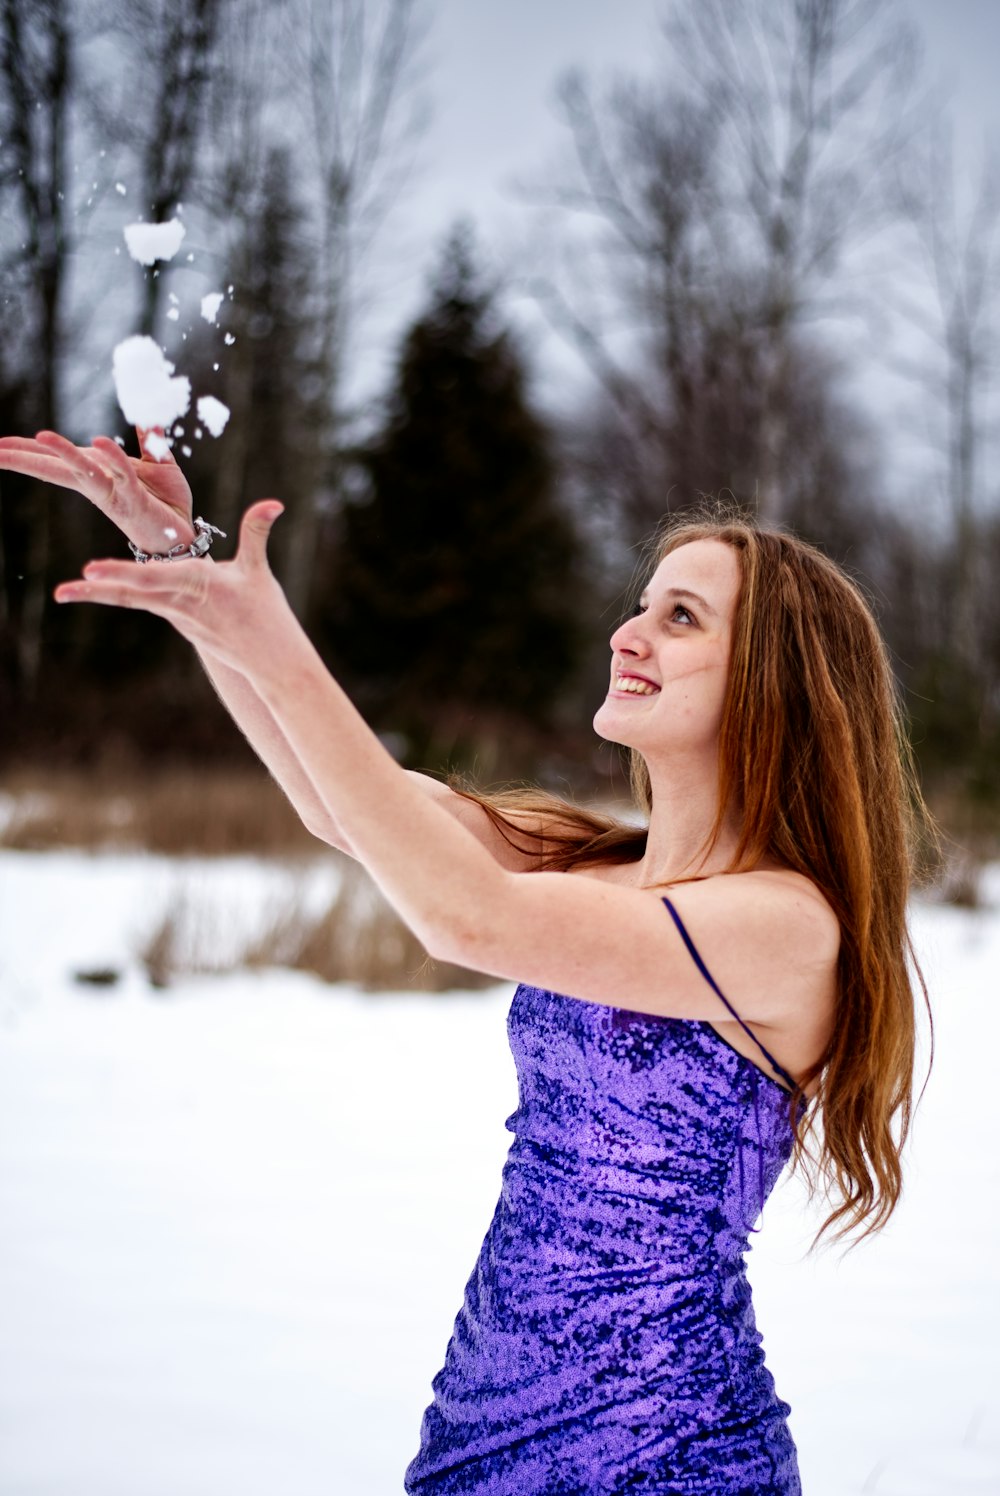 a woman in a purple dress throwing snow into the air